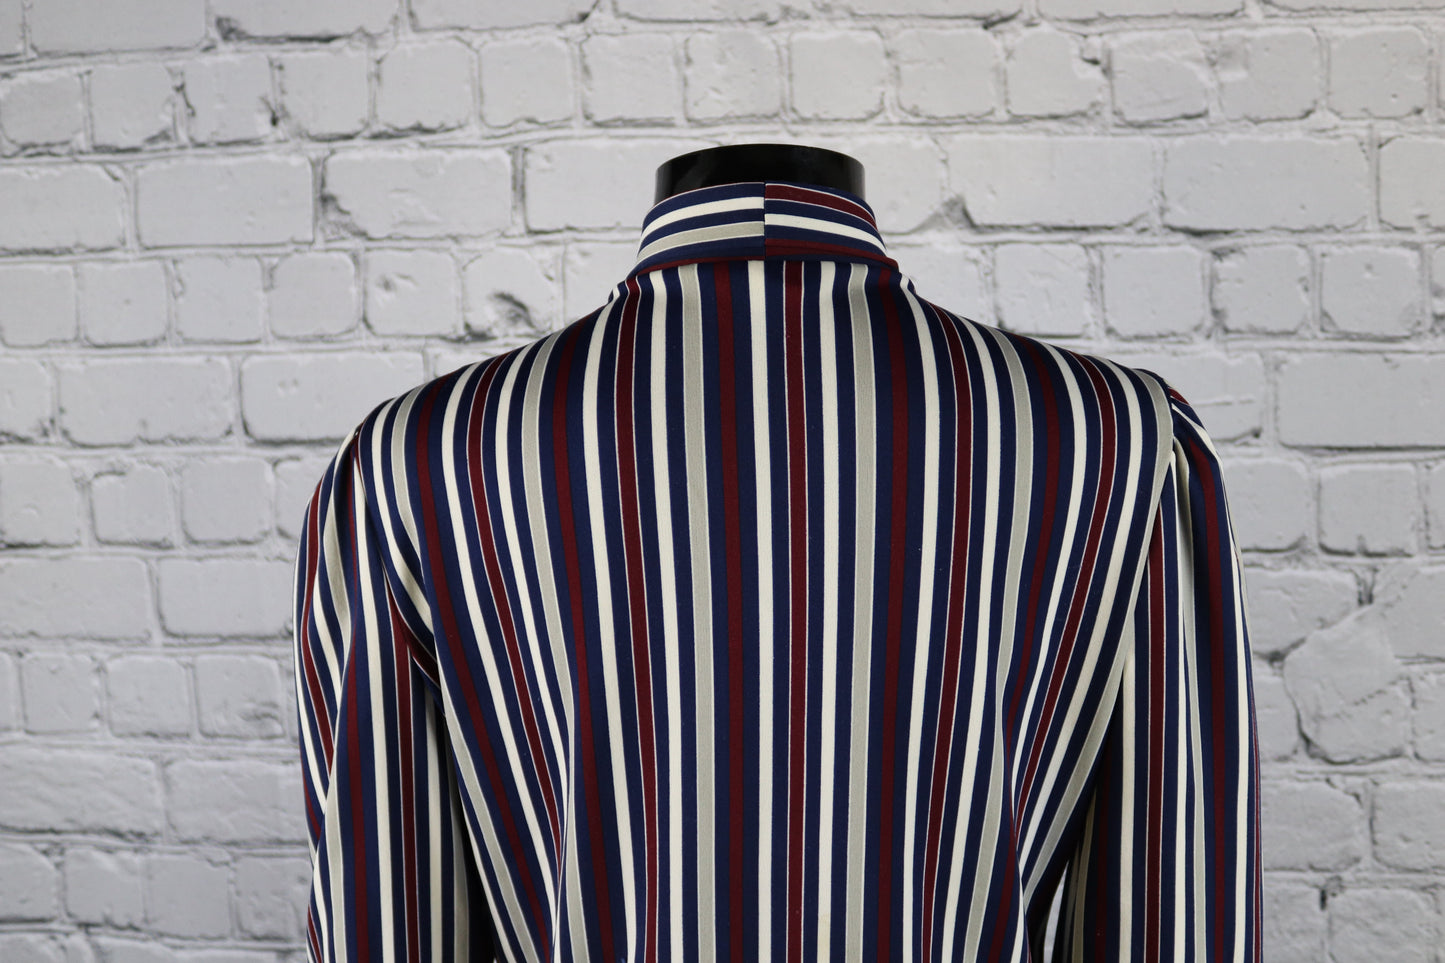 1980's Vintage Striped Blouse with Bow